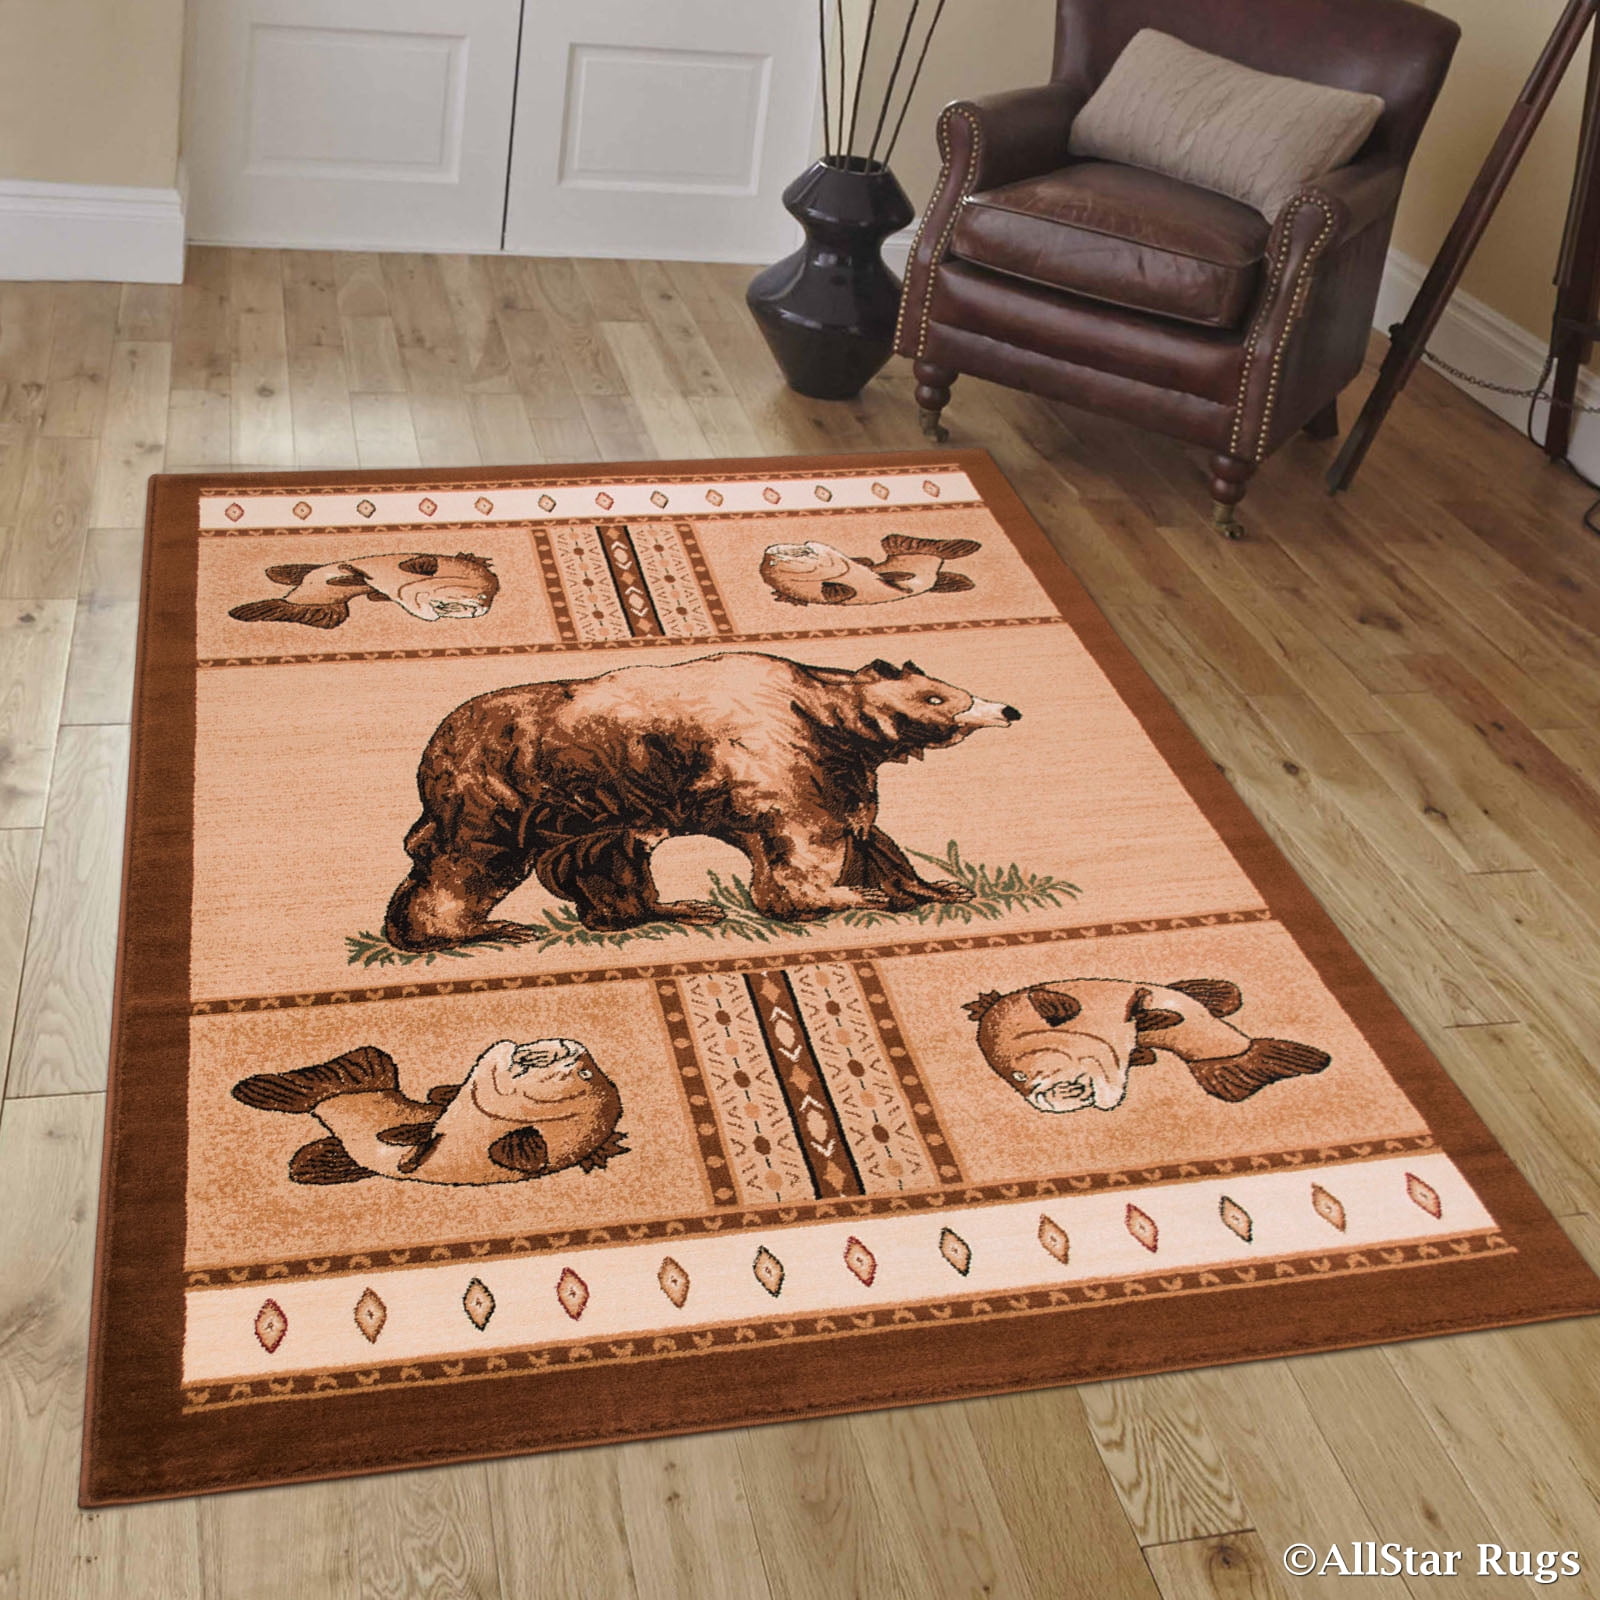 2' X 3' COUNTRY THEME LODGE MAT RUG SOUTHWESTERN BEAR CATCHING FISH CABIN RUG 